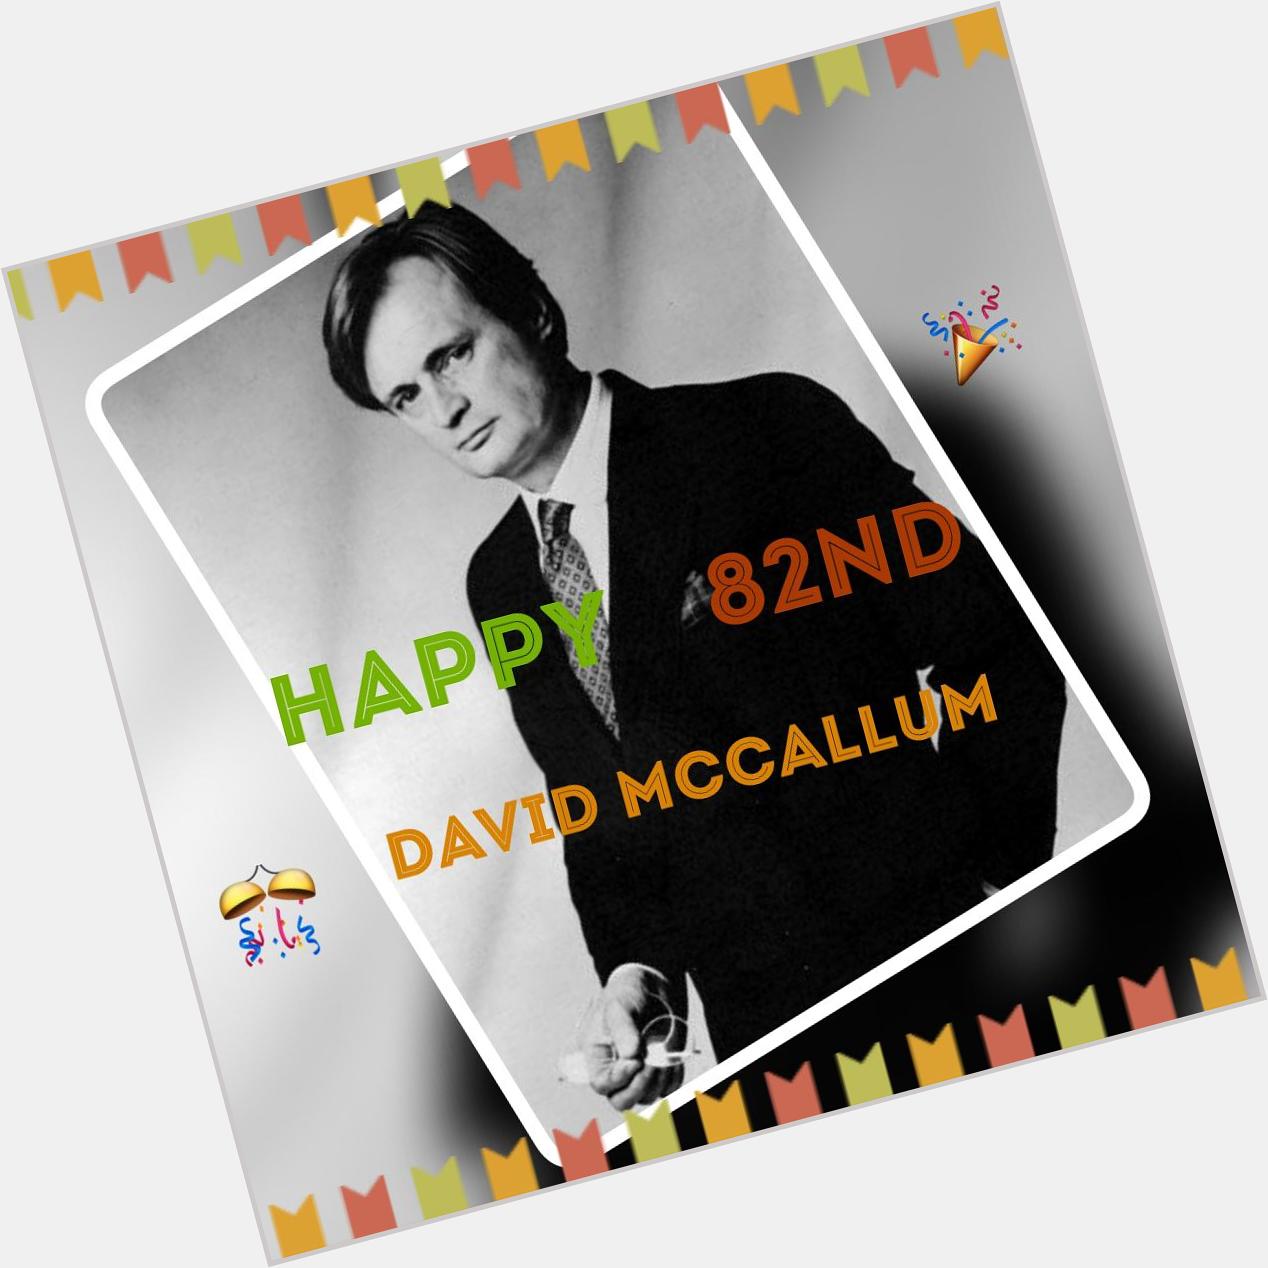 Today we celebrate 82nd bday of one of the best actors out there Happy birthday David McCallum (c) my edit 